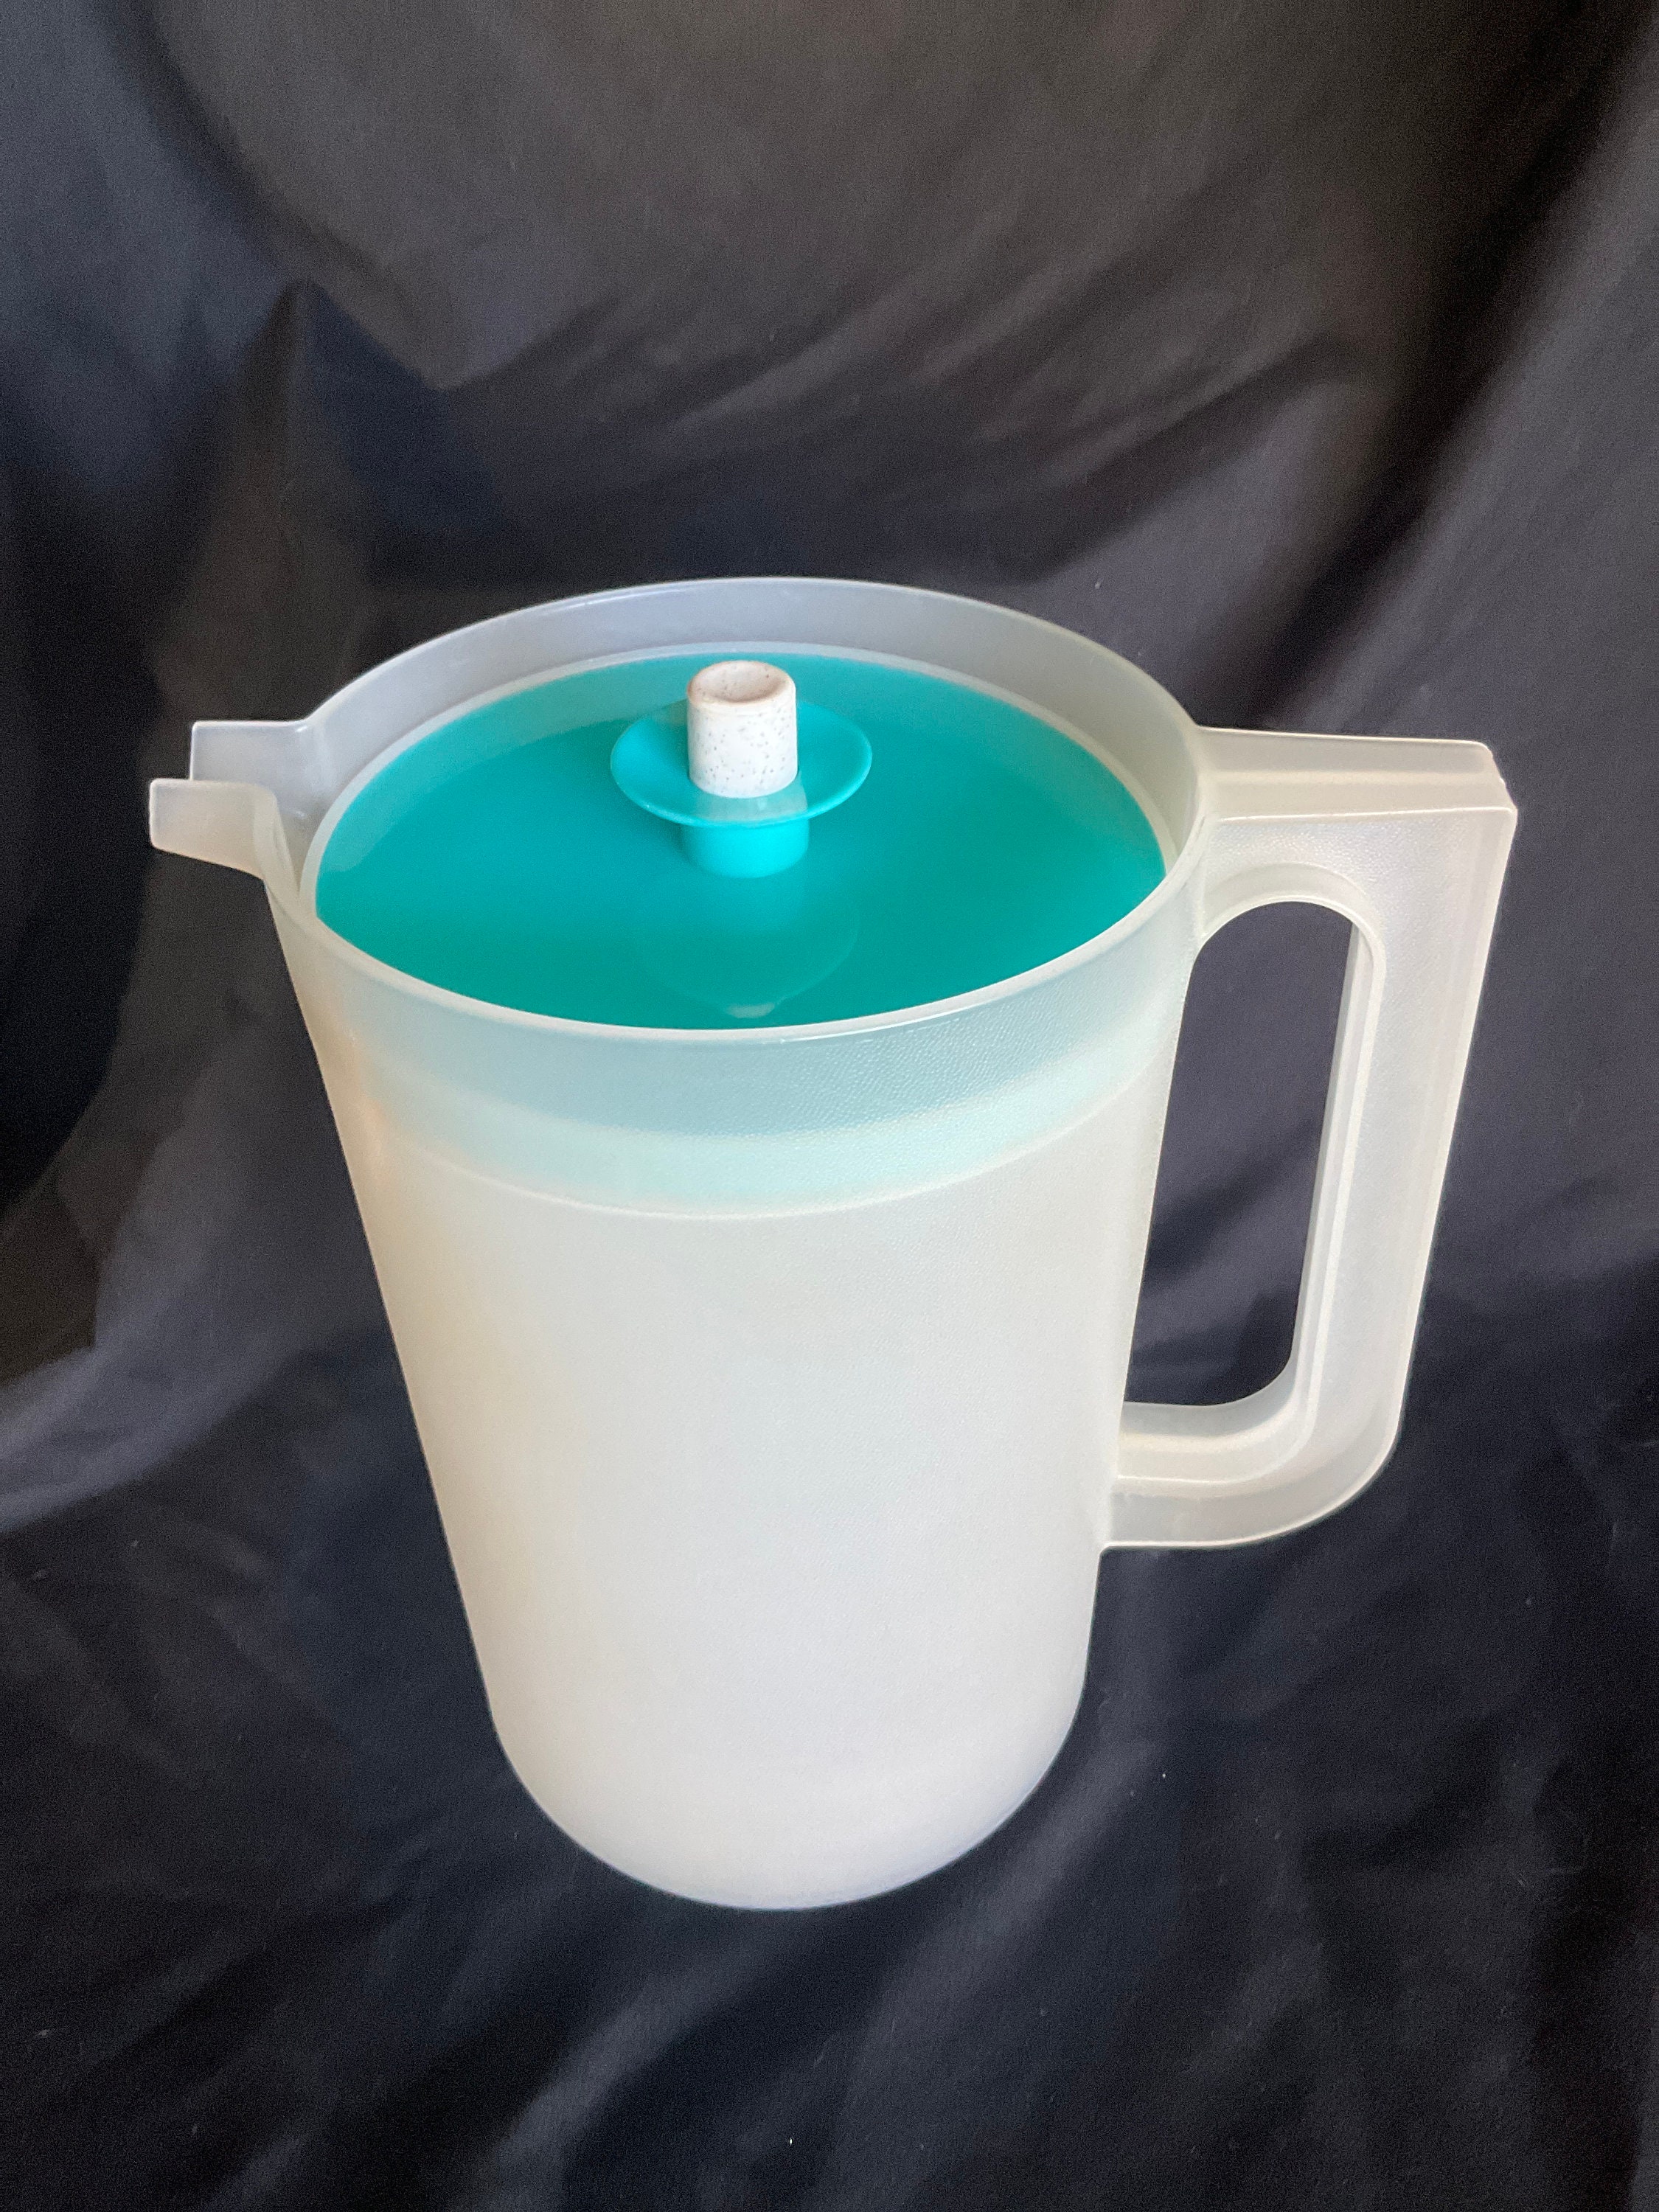 Vintage Tupperware Frosted 2 Quart Pitcher/Tupperware for Sale in